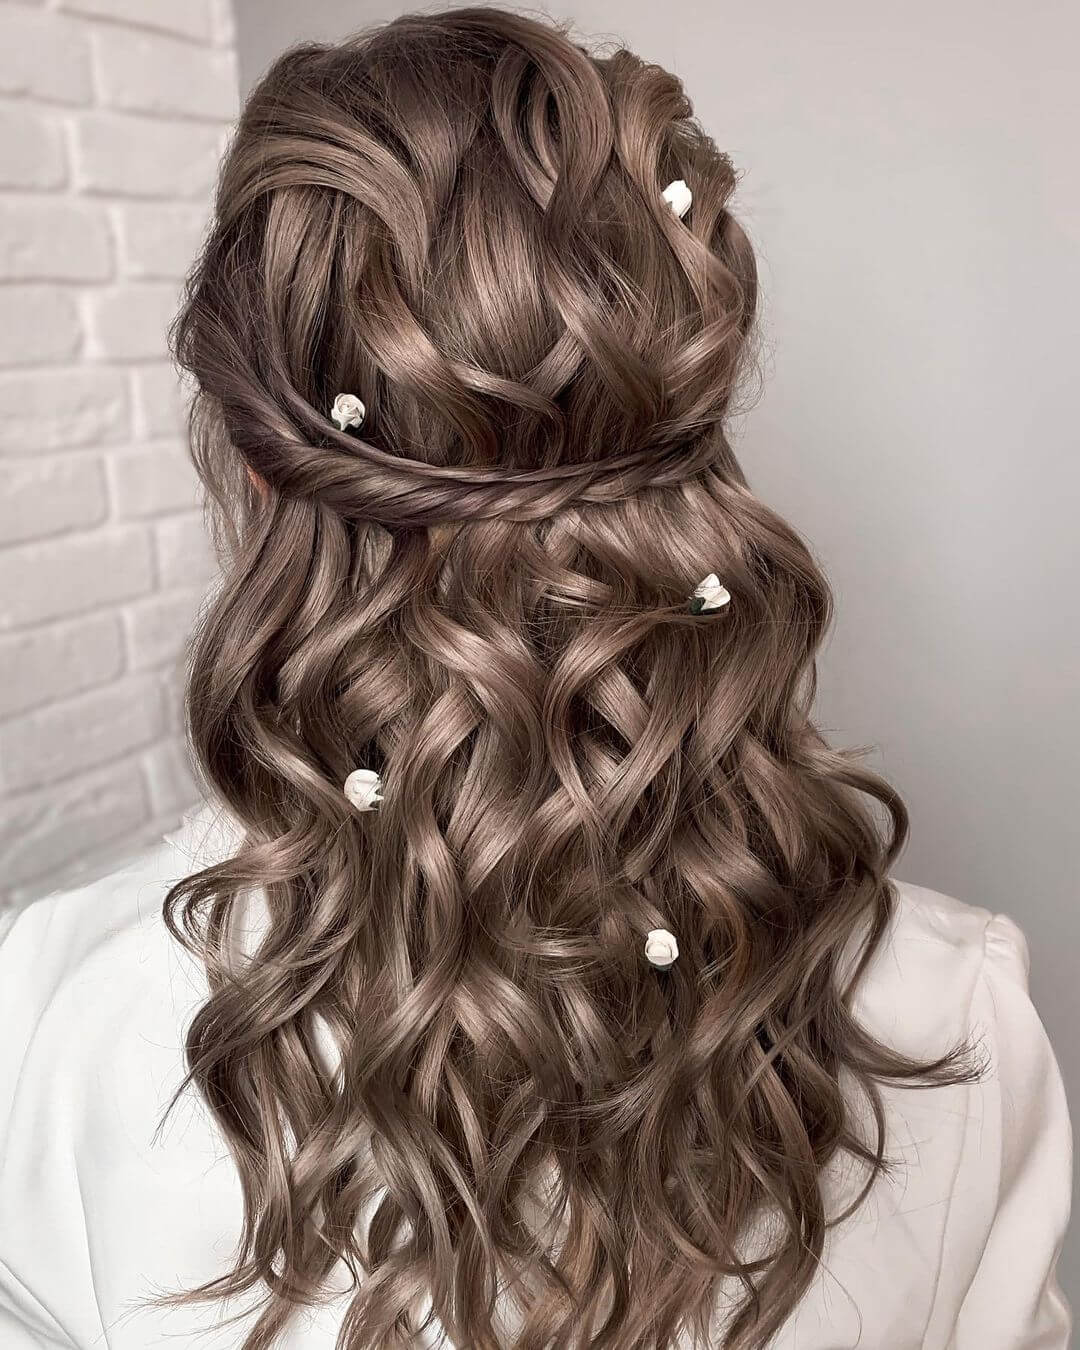 15 Easy Open Hairstyles Suited for Long Hair  K4 Fashion